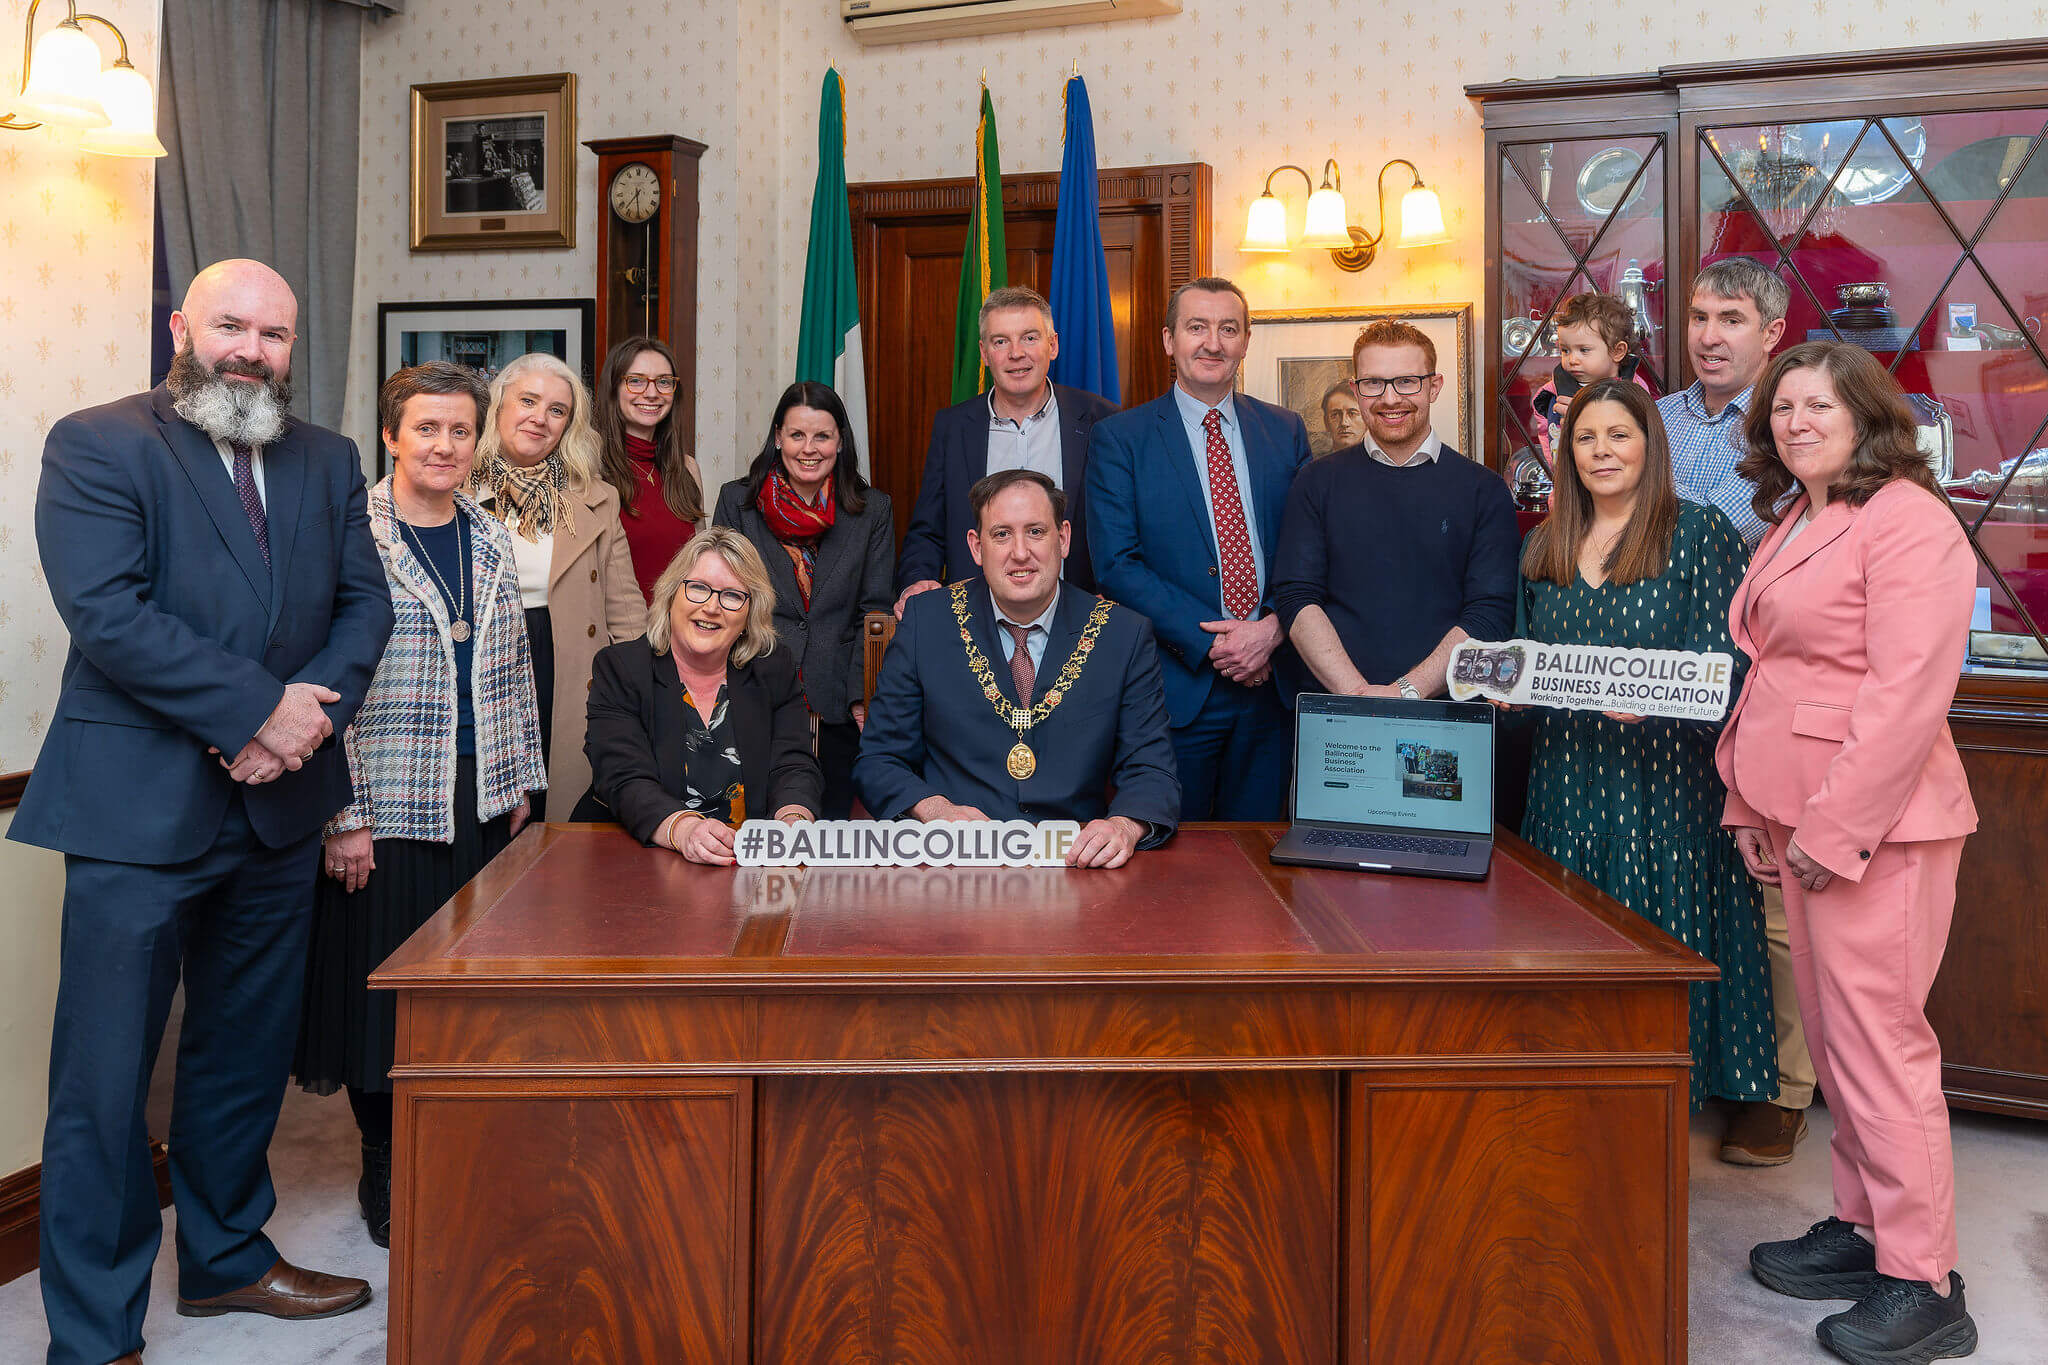 Celebrating Connectivity and Community: The Official Launch of Ballincollig.ie